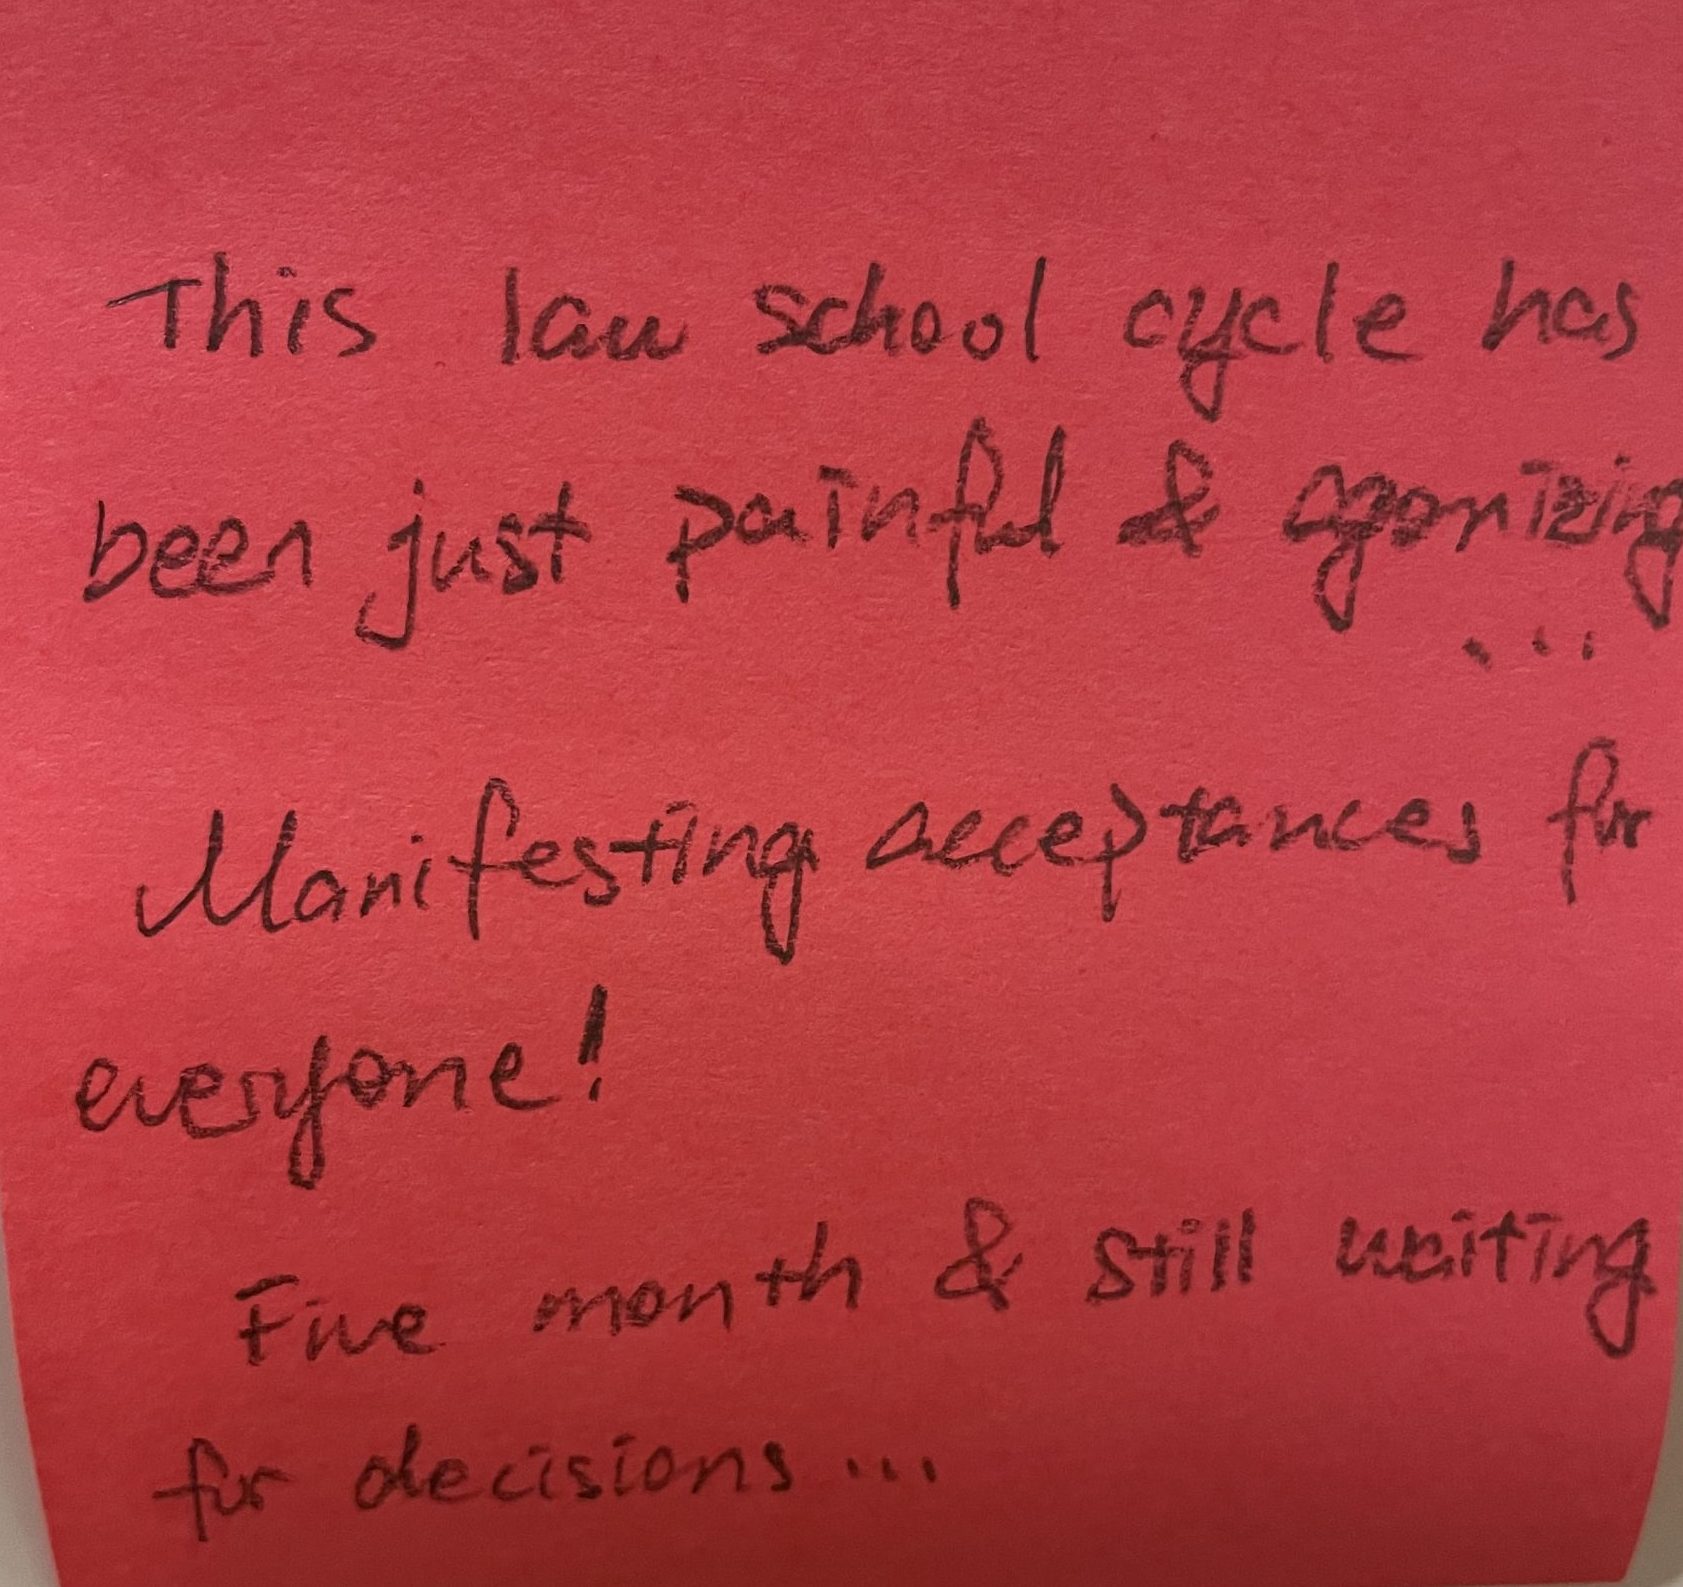 This law school cycle has been just painful & agonizing…Manifesting